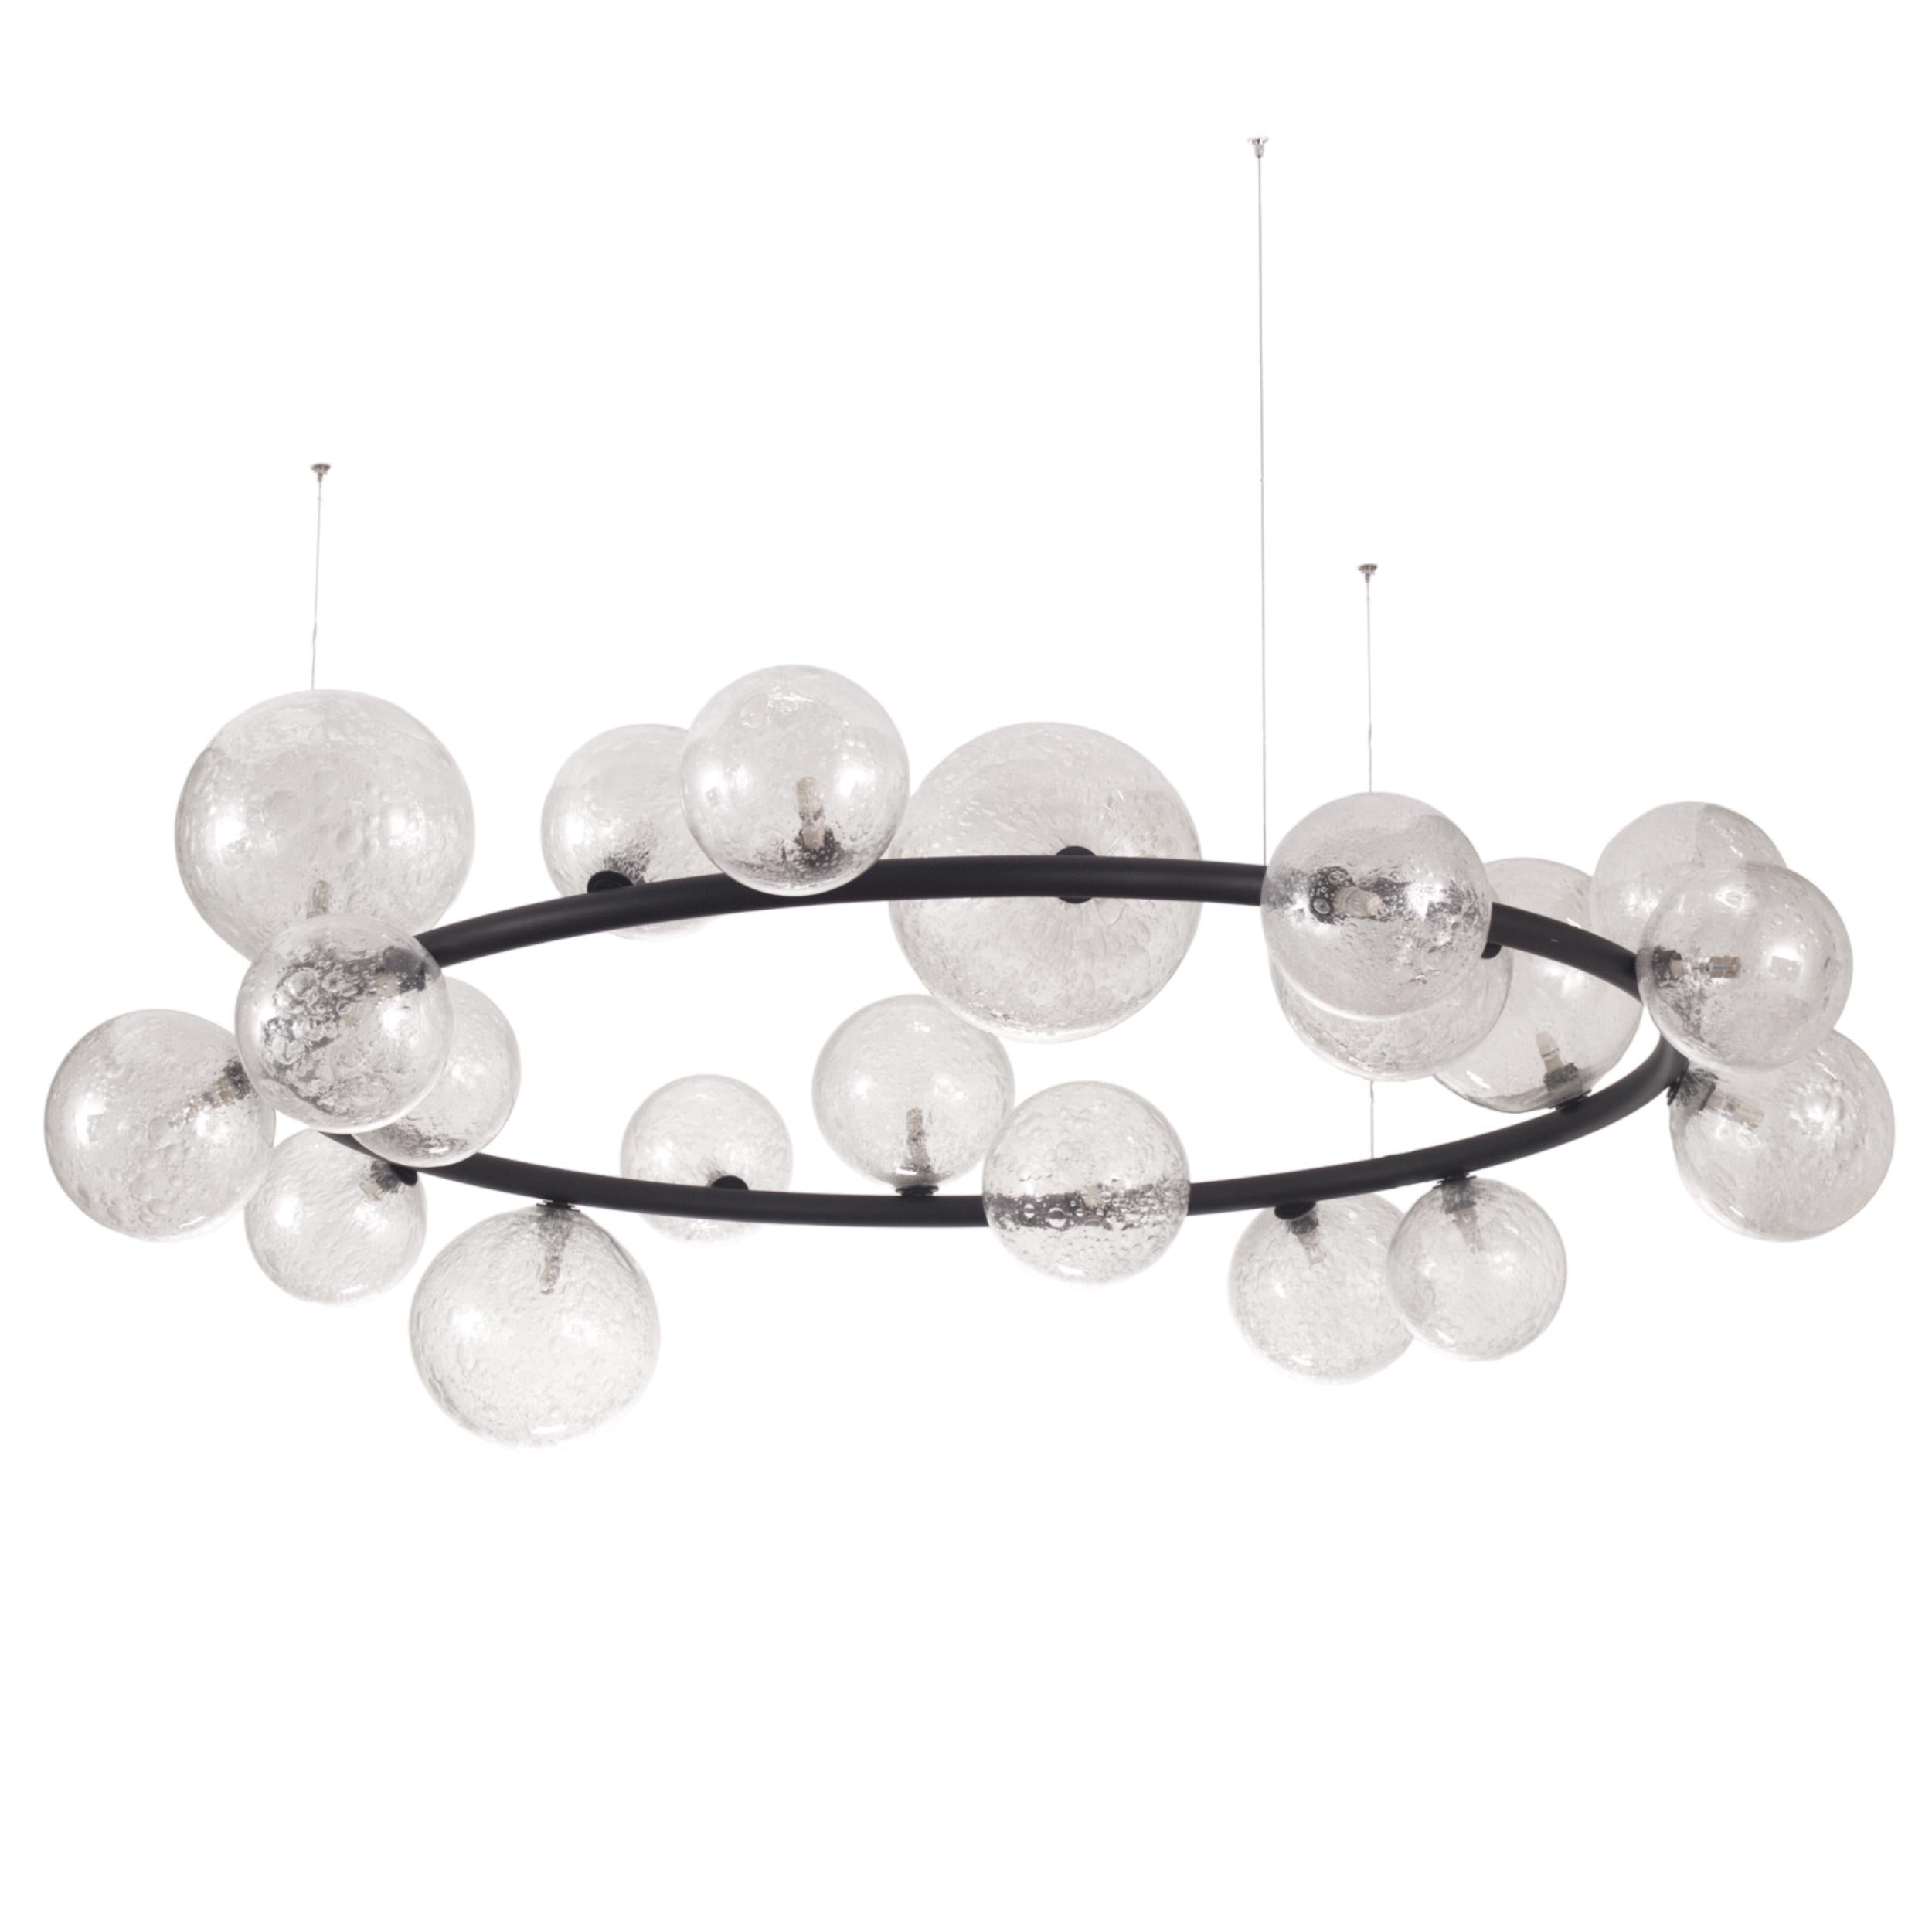 Artistic Suspension Ring lamp Murano Glass Spheres Black Fixture by Multiforme